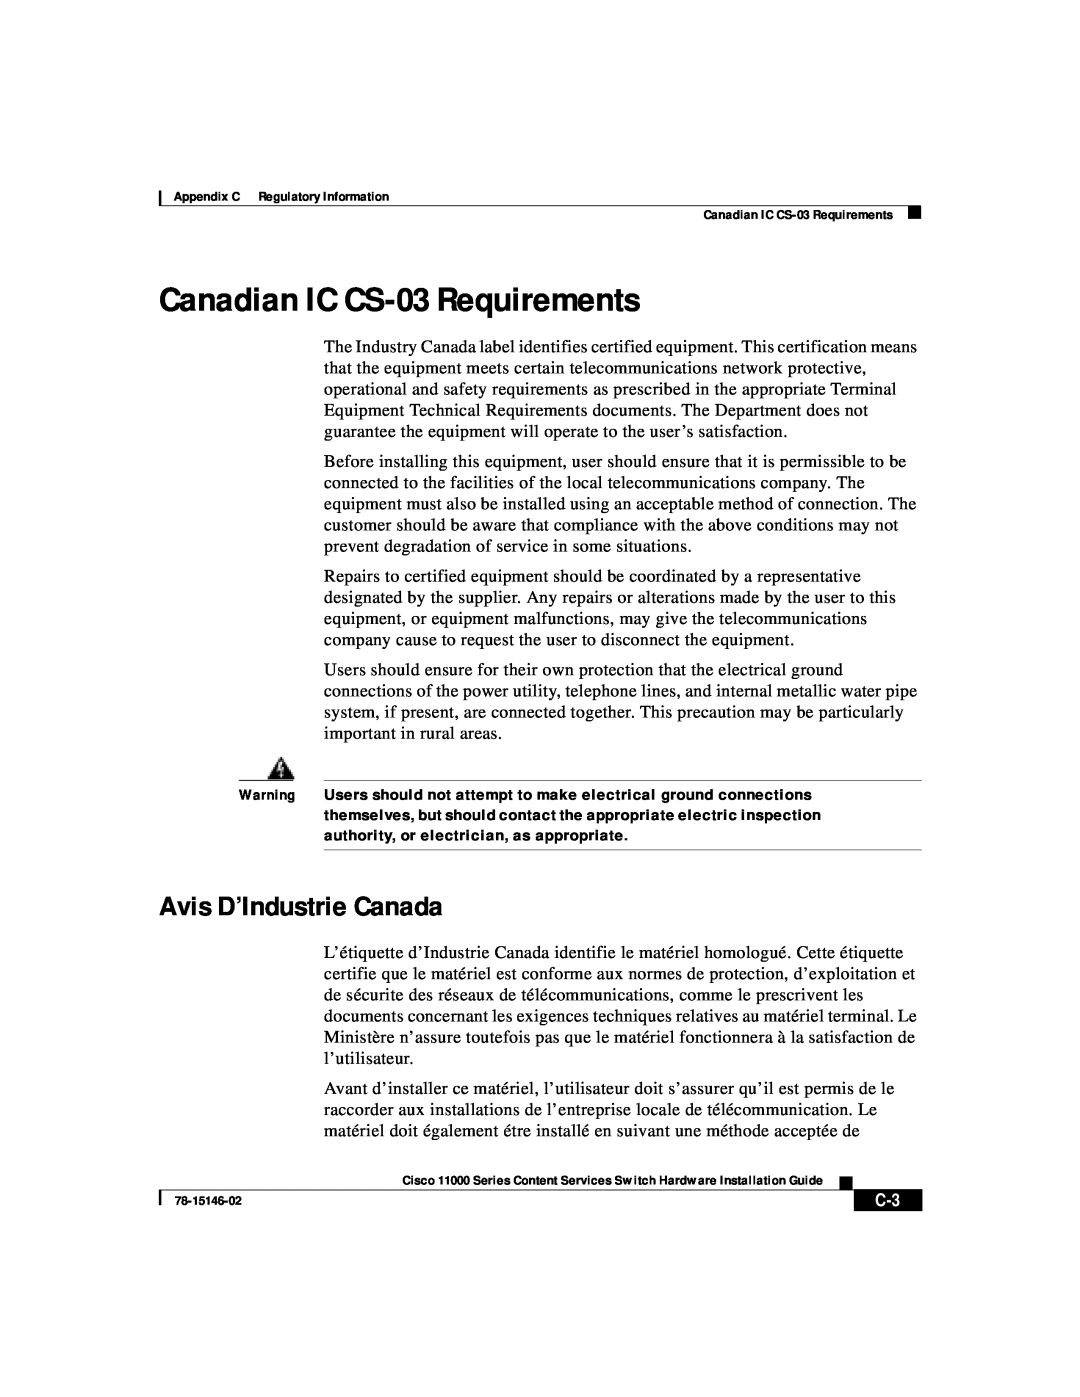 Cisco Systems 11000 Series manual Canadian IC CS-03 Requirements, Avis D’Industrie Canada 